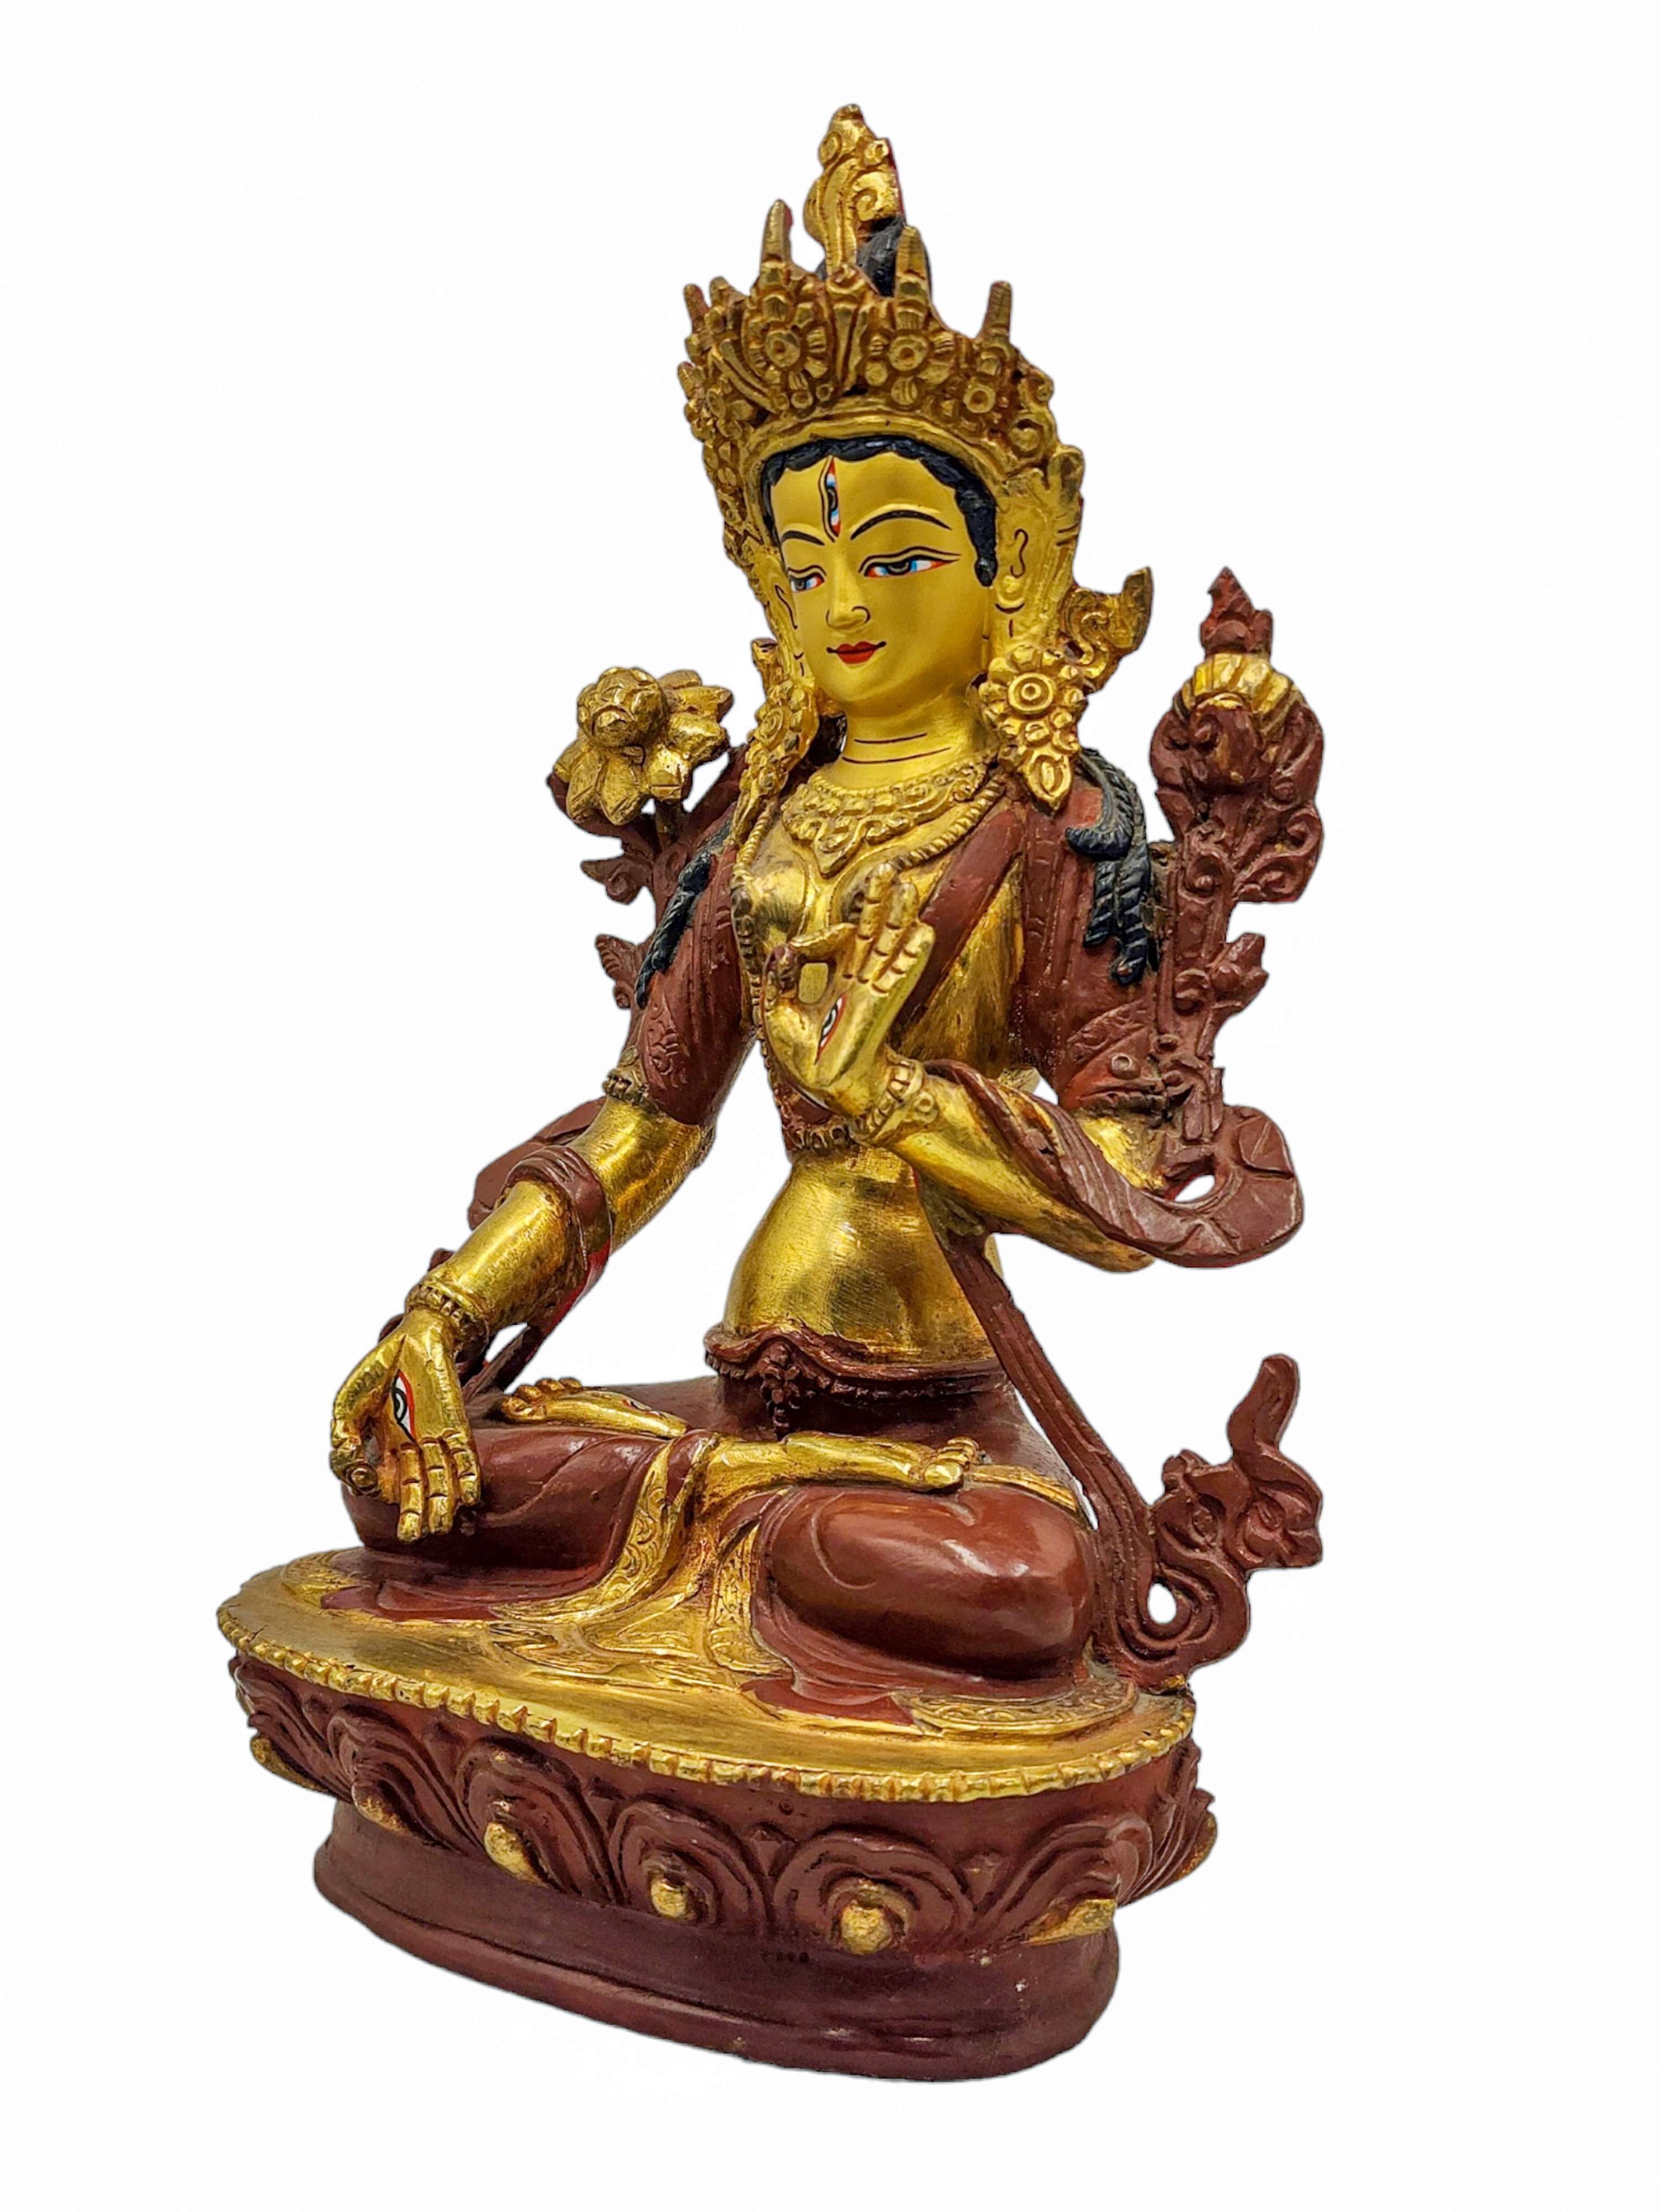 white Tara, Buddhist Handmade Statue, partly Gold Plated, Wtih face Painted